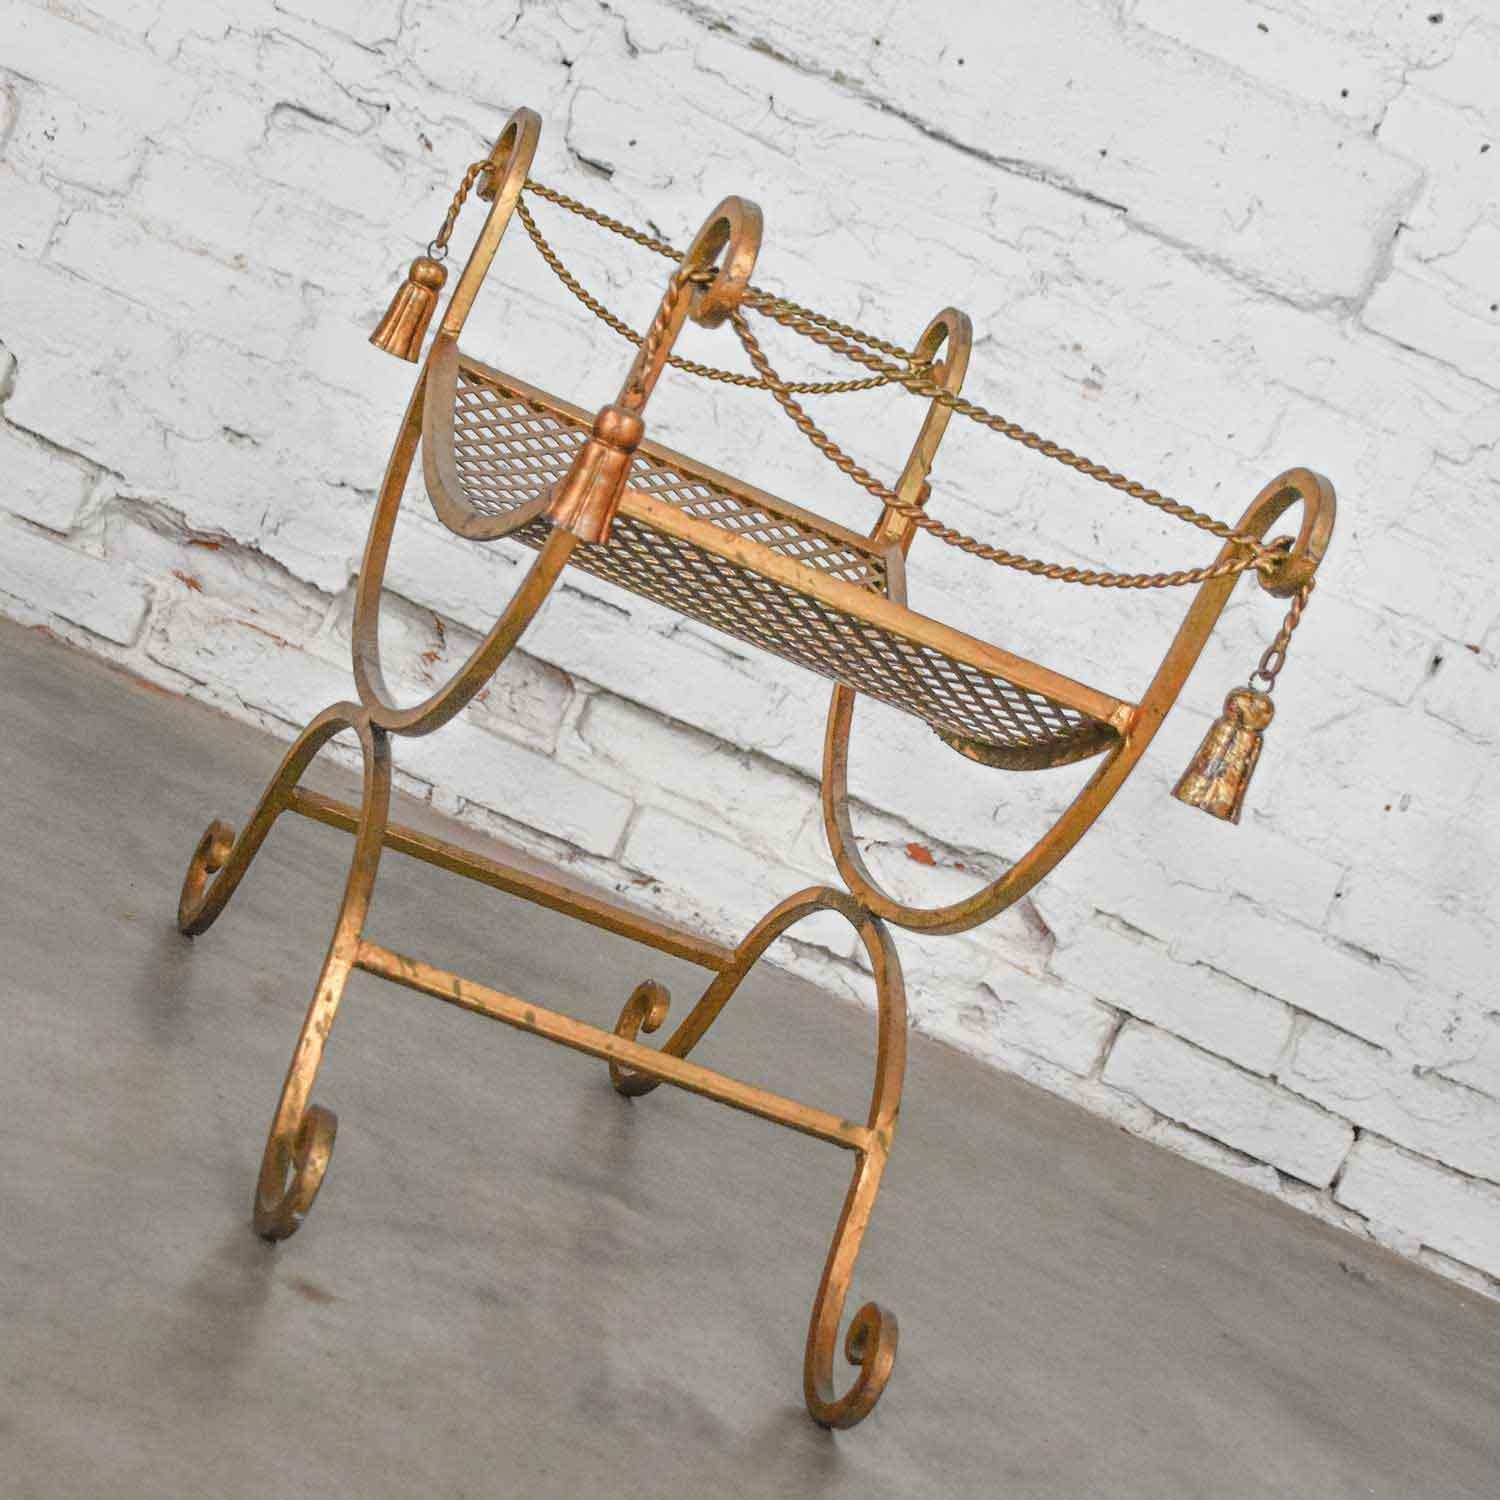 Wonderful, gilded wrought iron Italian Hollywood Regency vanity stool with twisted rope and tassels detail in a Curule or Savonarola style. This piece is in wonderful vintage condition. However, it does have a few signs of wear where the gilding is